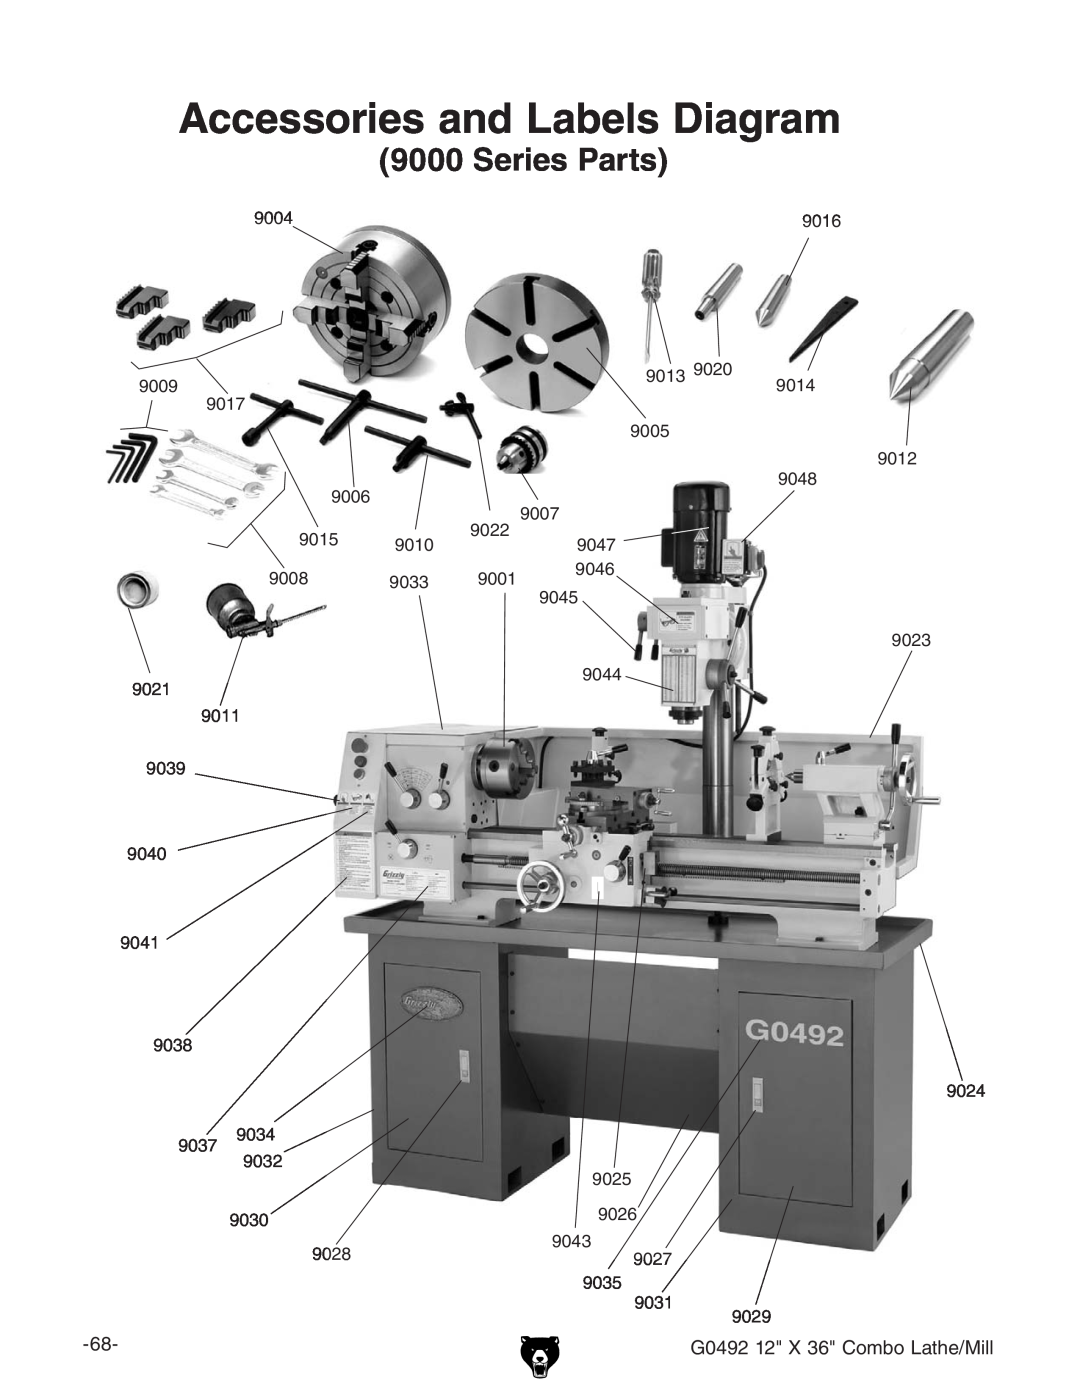 Grizzly G0492 manual Accessories and Labels Diagram, Series Parts, &M+8dbWdAViZ$Baa 